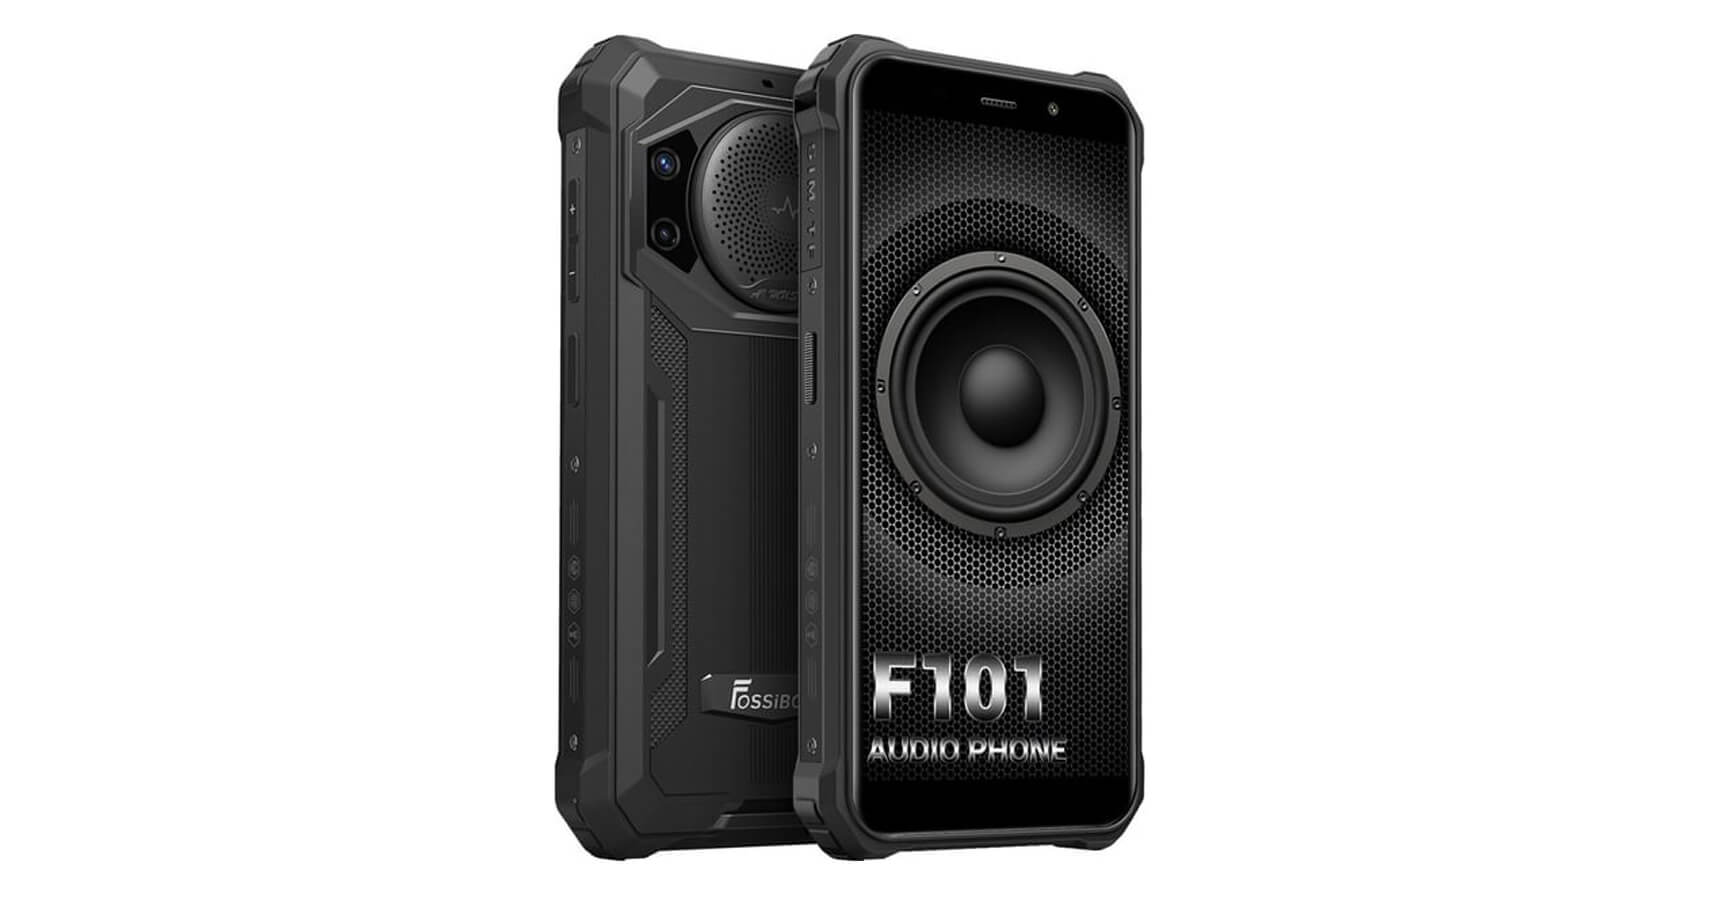 FOSsiBOT F101 Rugged Phone Launched